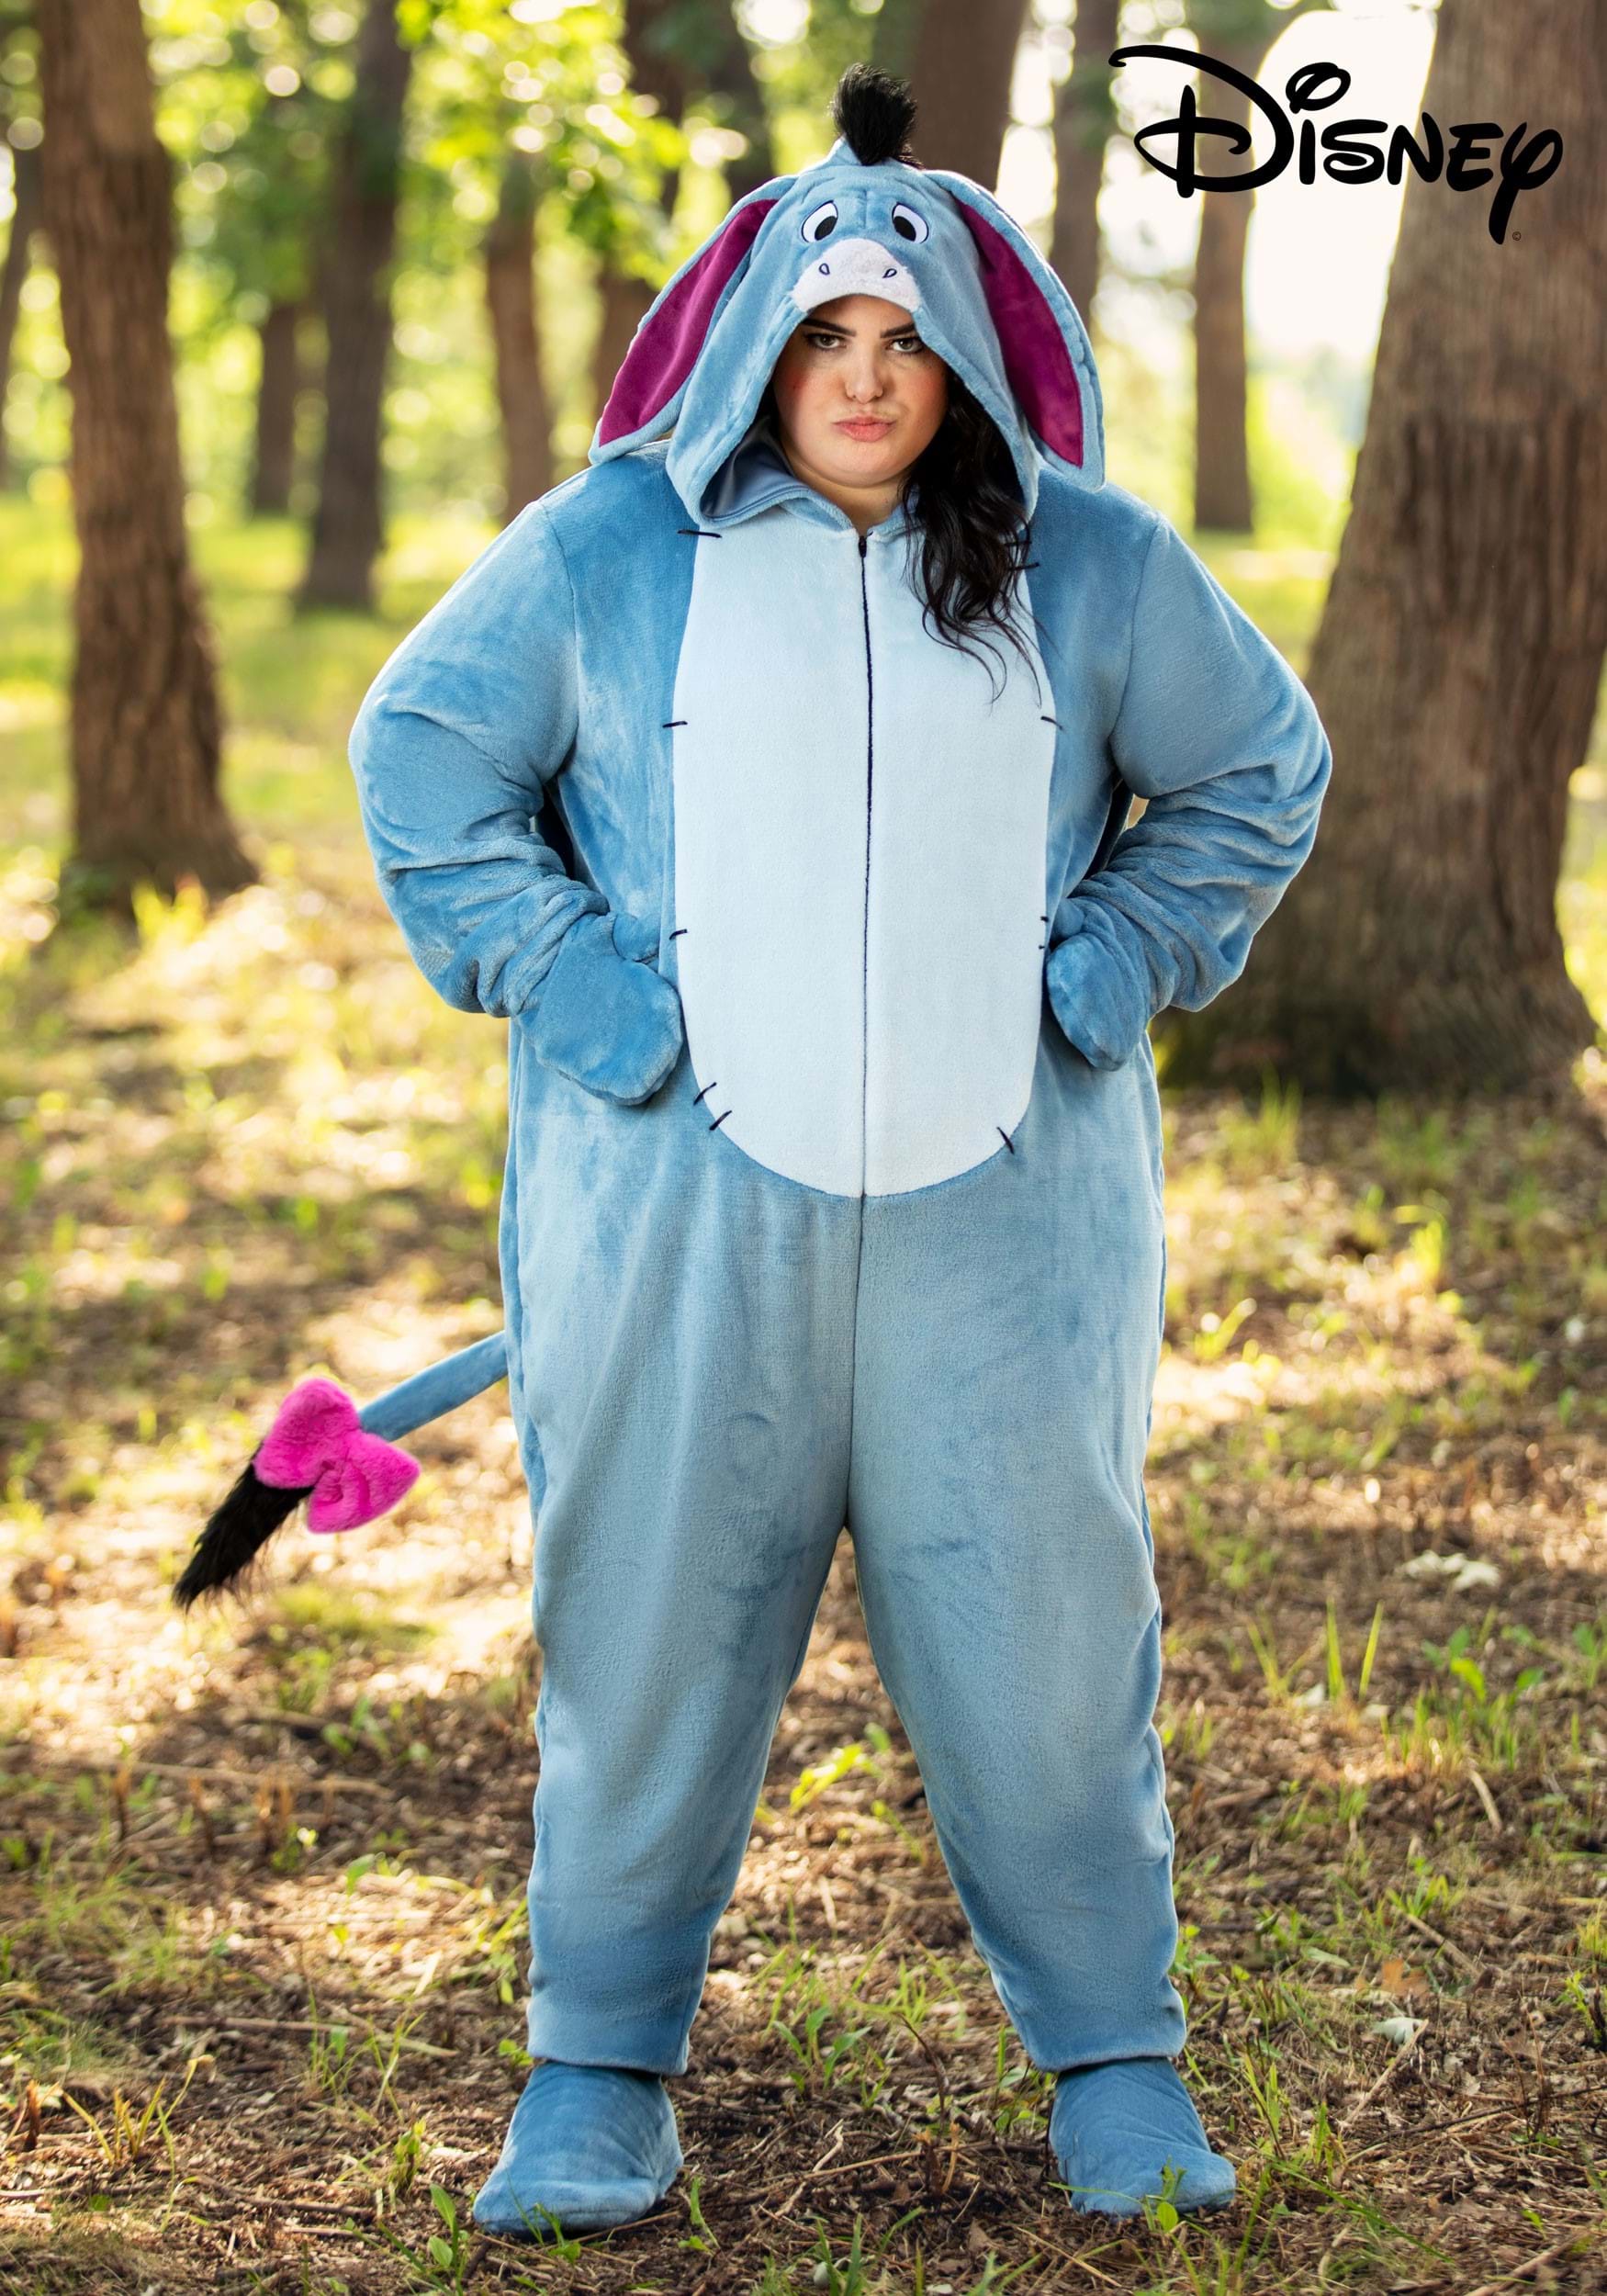  Disney Lilo and Stitch Angel Costume for Adults, Women's Angel  Onesie Outfit with Character Hood, Gloves, and Shoe Covers Large :  Clothing, Shoes & Jewelry